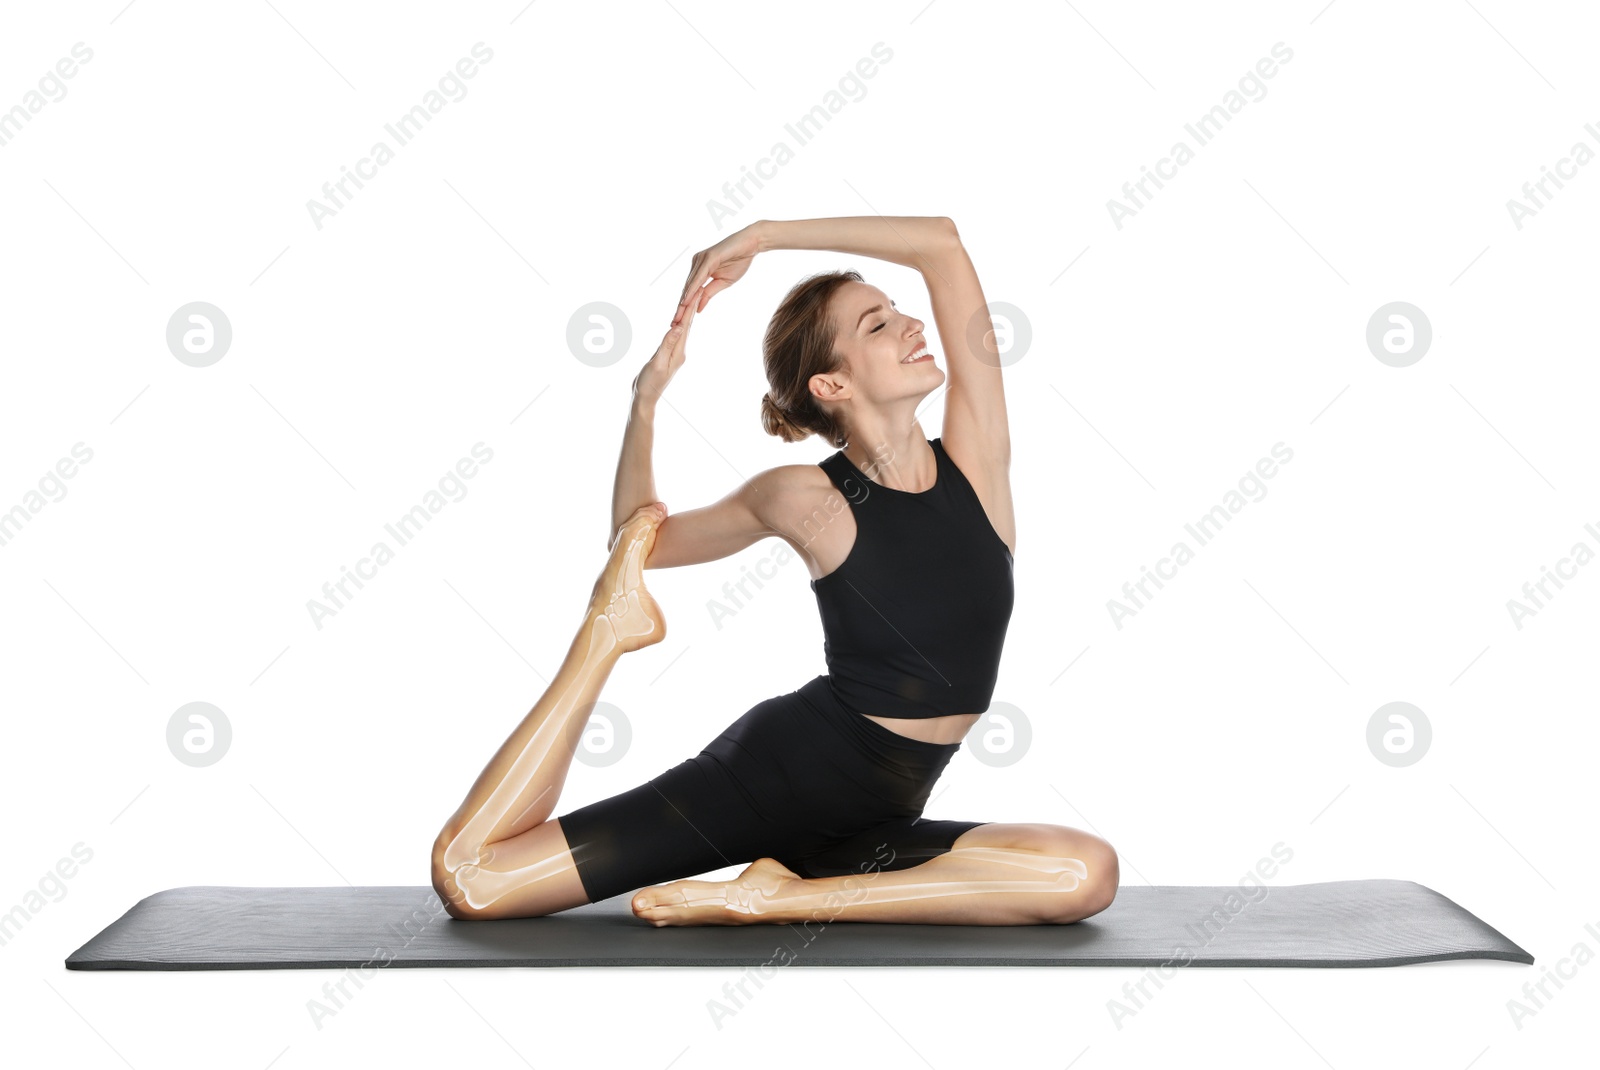 Image of Digital composite of highlighted bones and young woman practicing yoga on white background